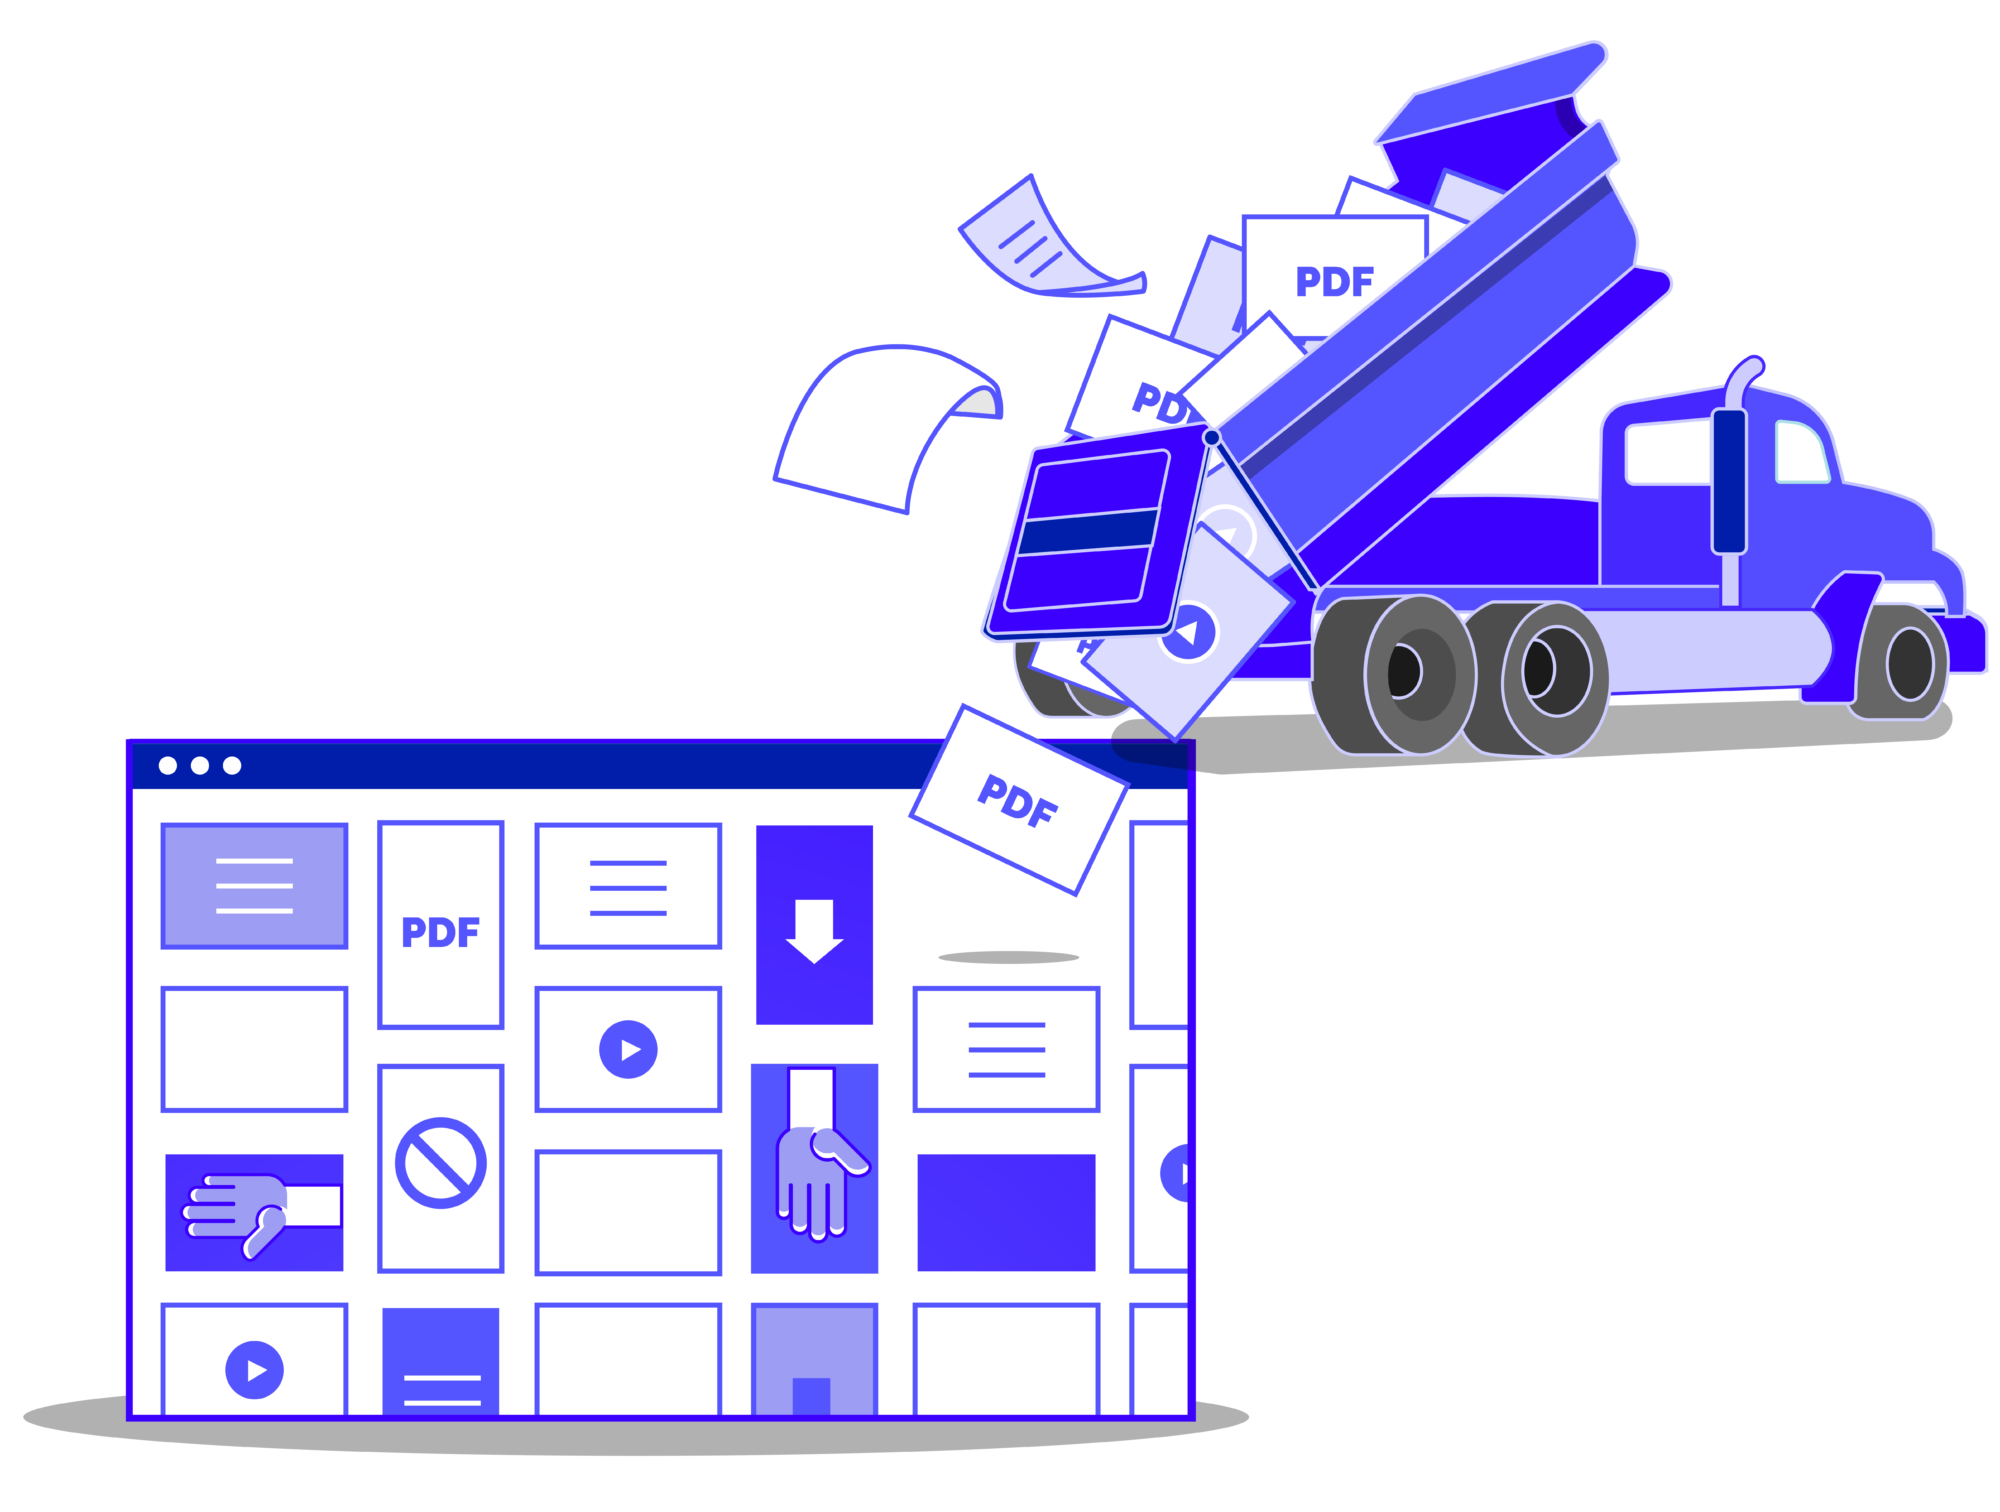 An illustration of a dumptruck dumping content assets, labelled as videos and PDFs, into a B2B marketing resource center